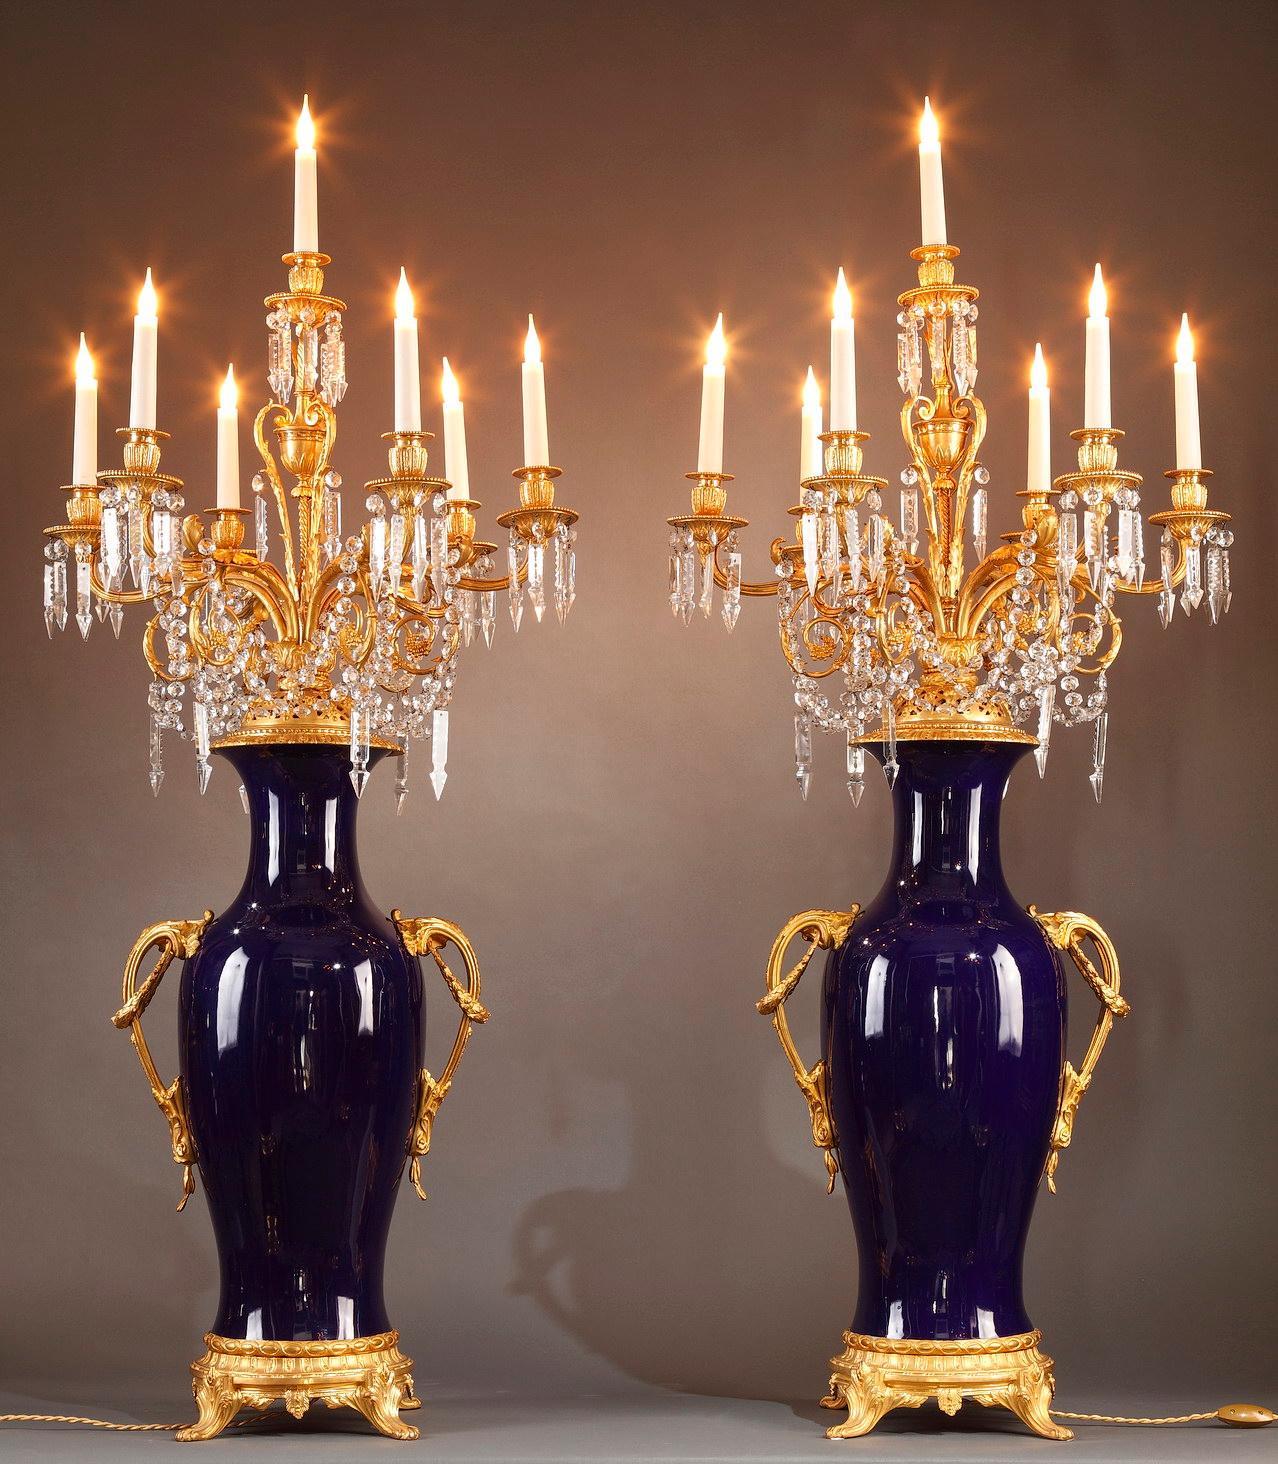 Large pair of baluster-shaped candelabra vases with seven lights, in gros bleu porcelain and chiselled and gilded bronze. The sconces, adorned with foliage and vine branches, are joined by elegant garlands of crystals cut in prisms and mirzas. Two